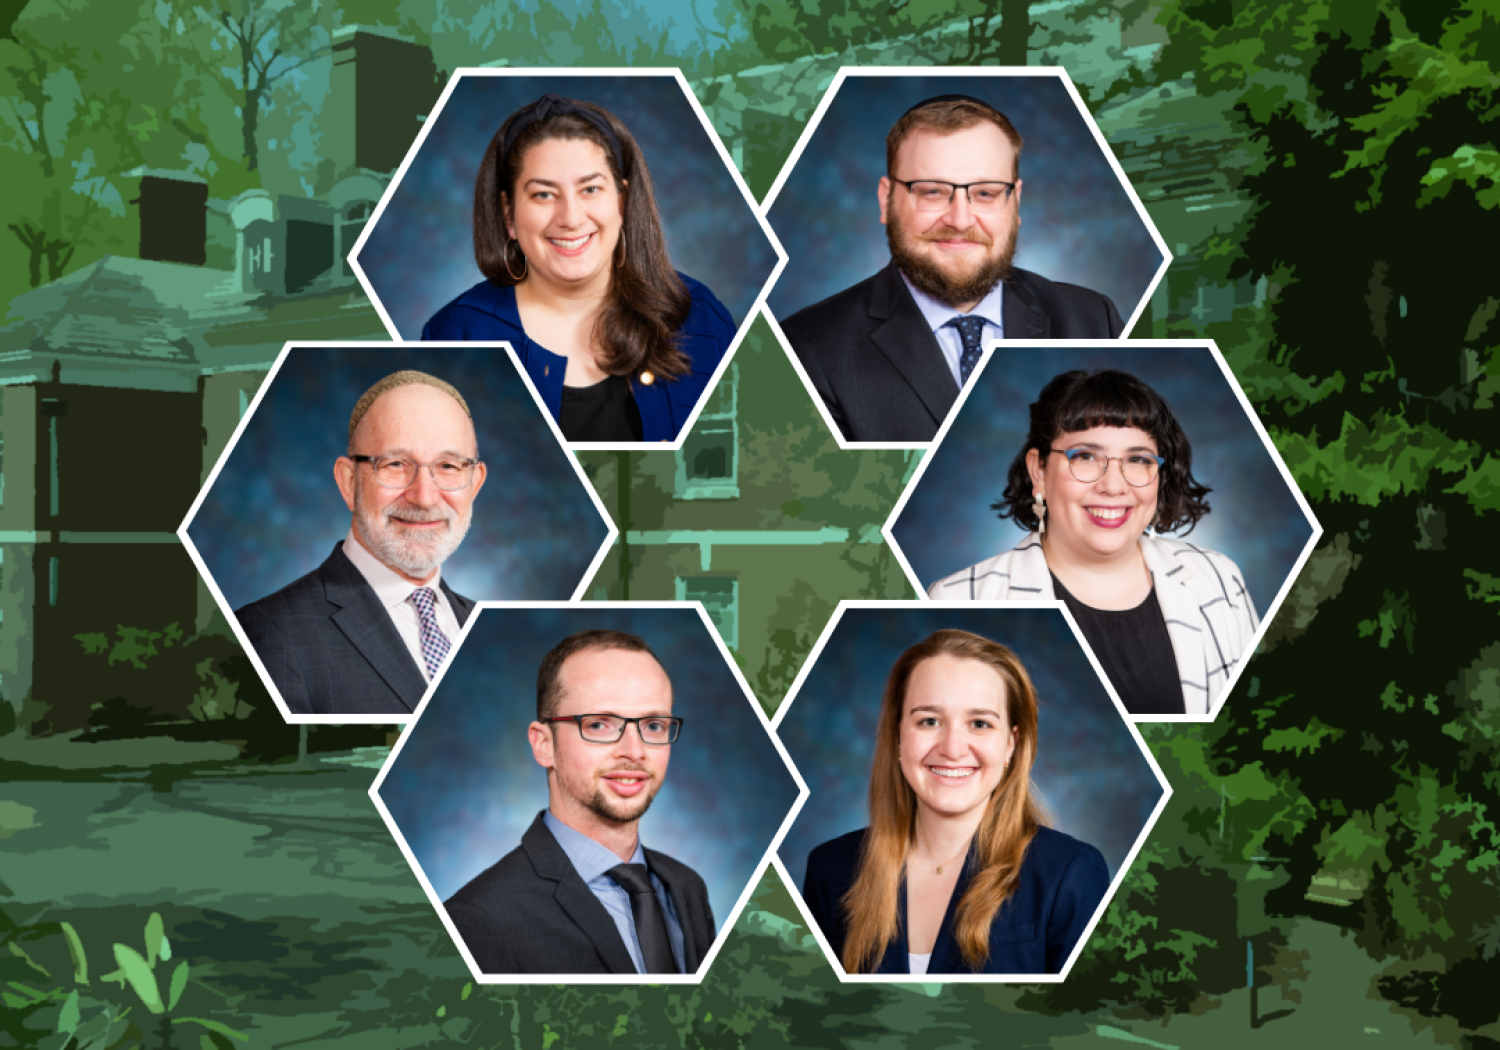 Image has all 6 graduates headshots in front of a green background of the college's building